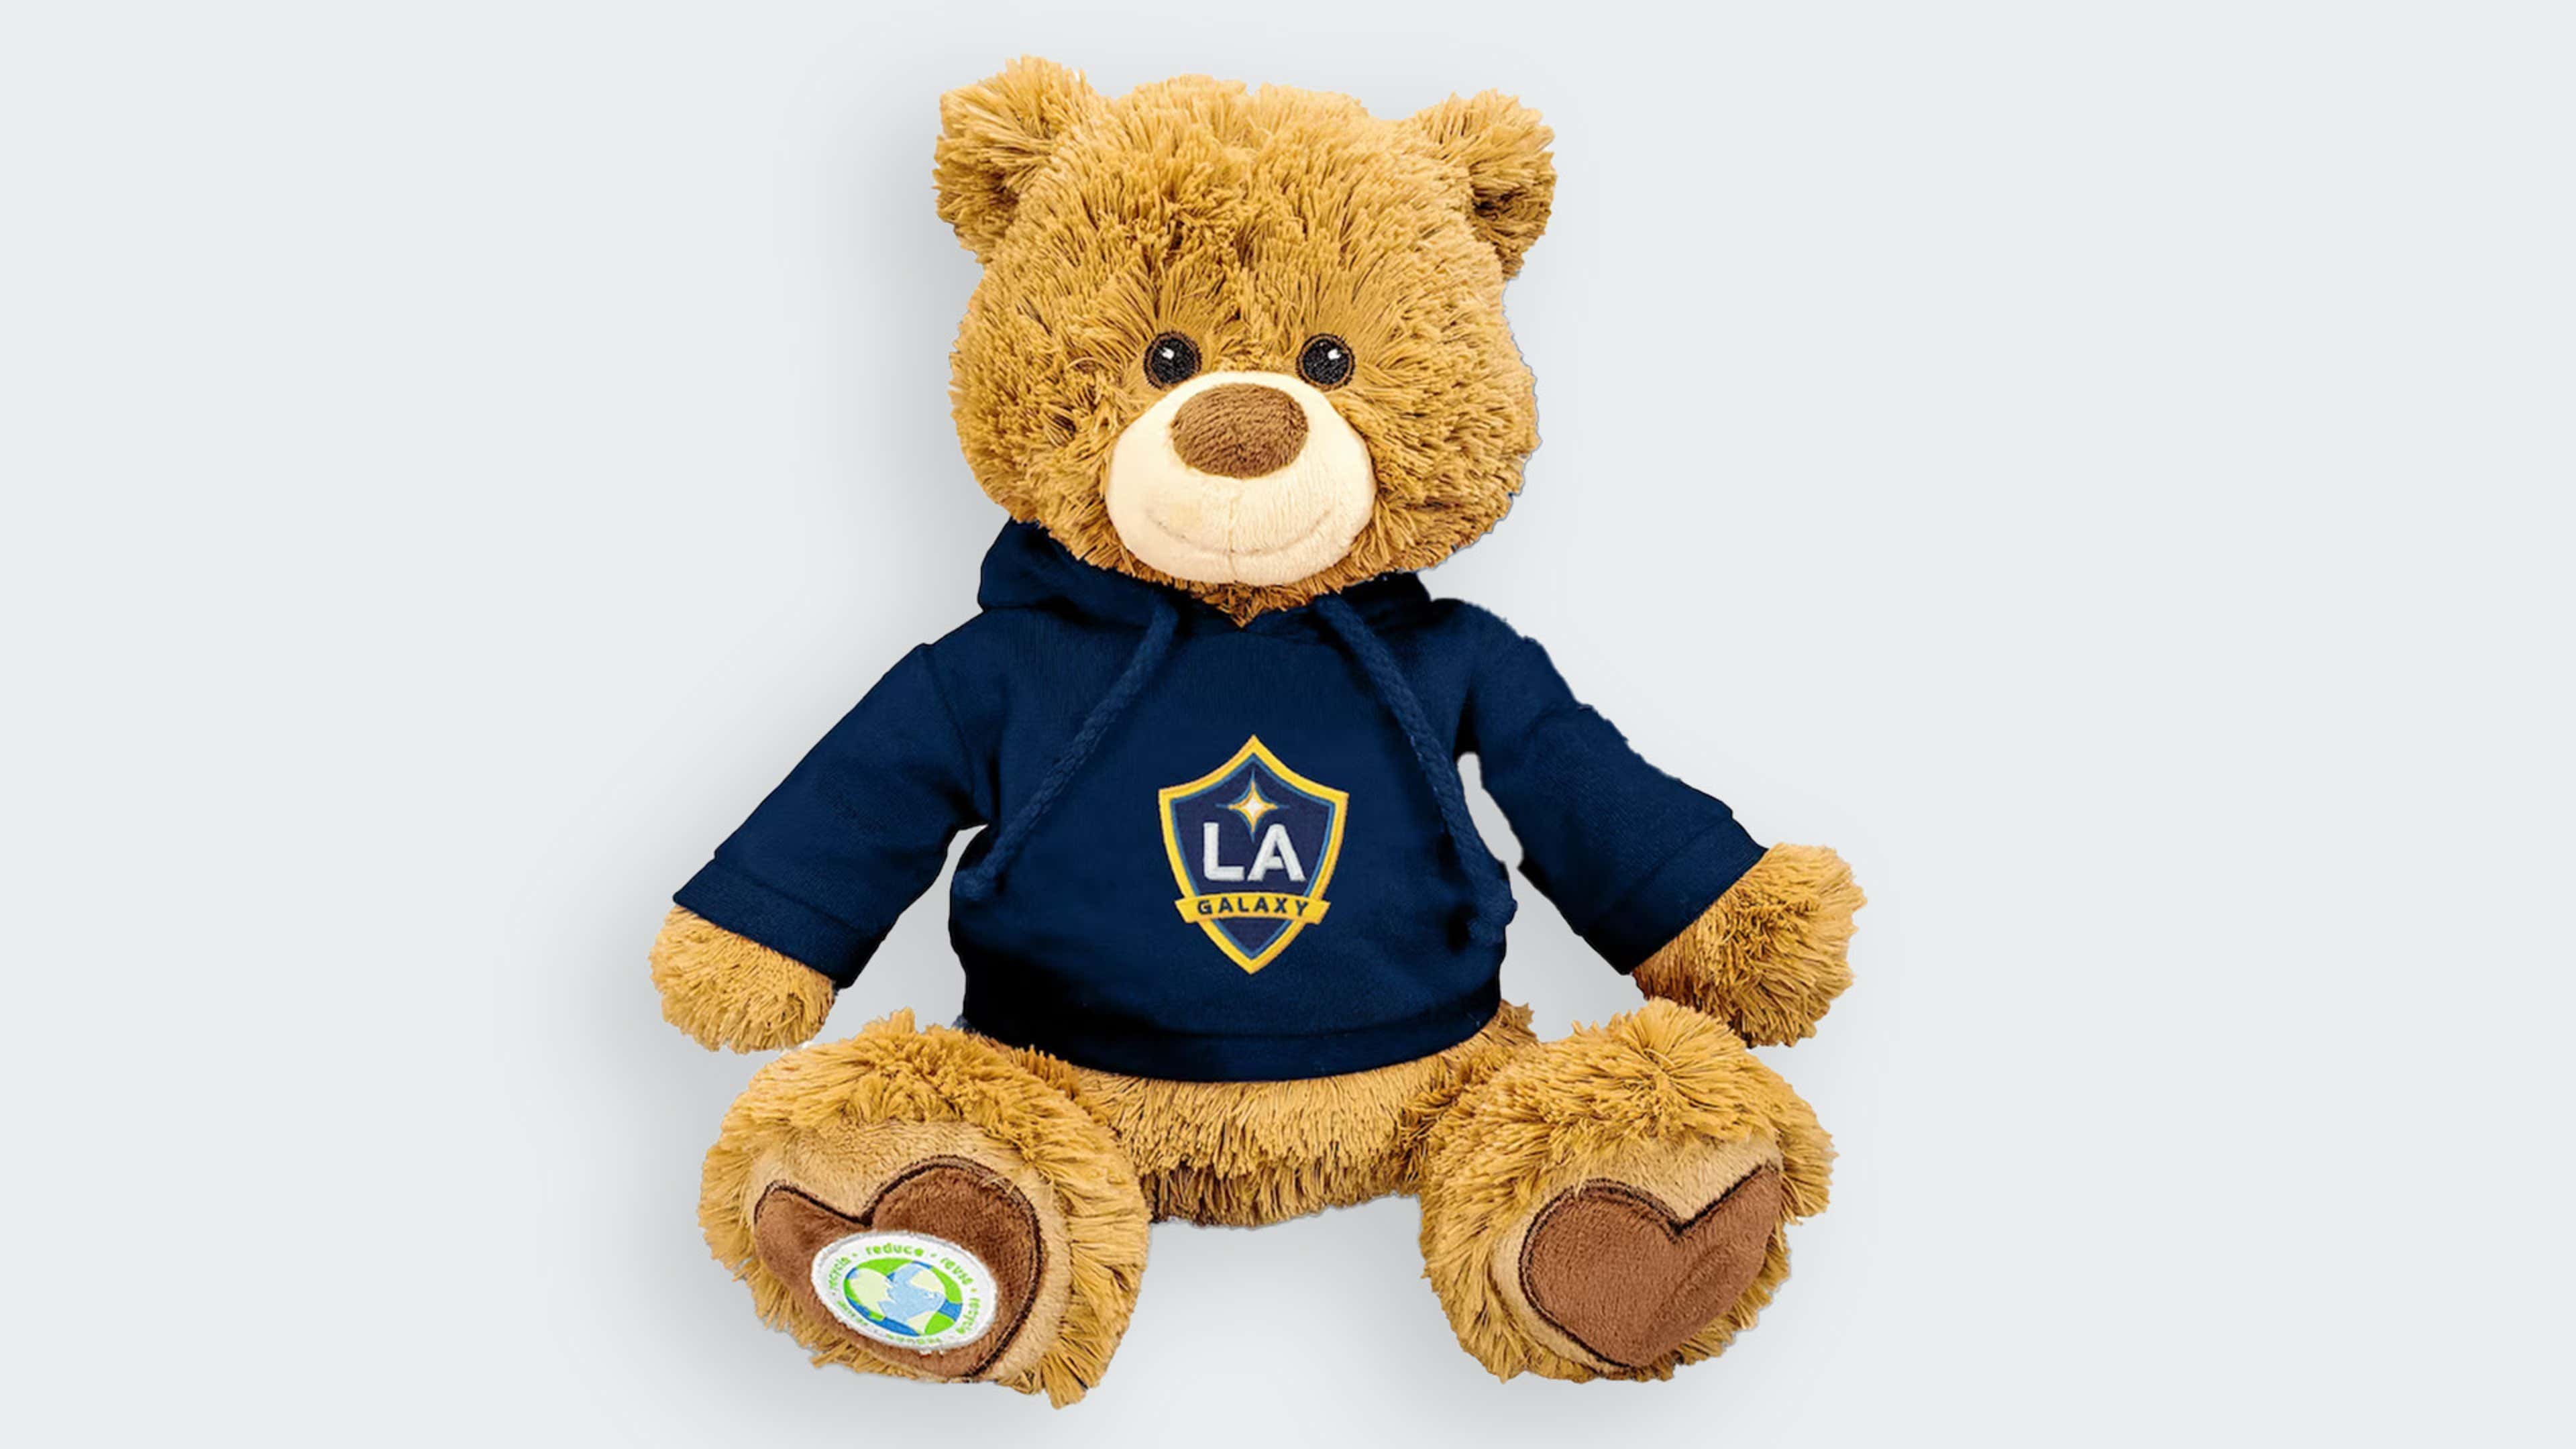 Best LA Galaxy merch 2023: Where can I buy it and how much does it cost?